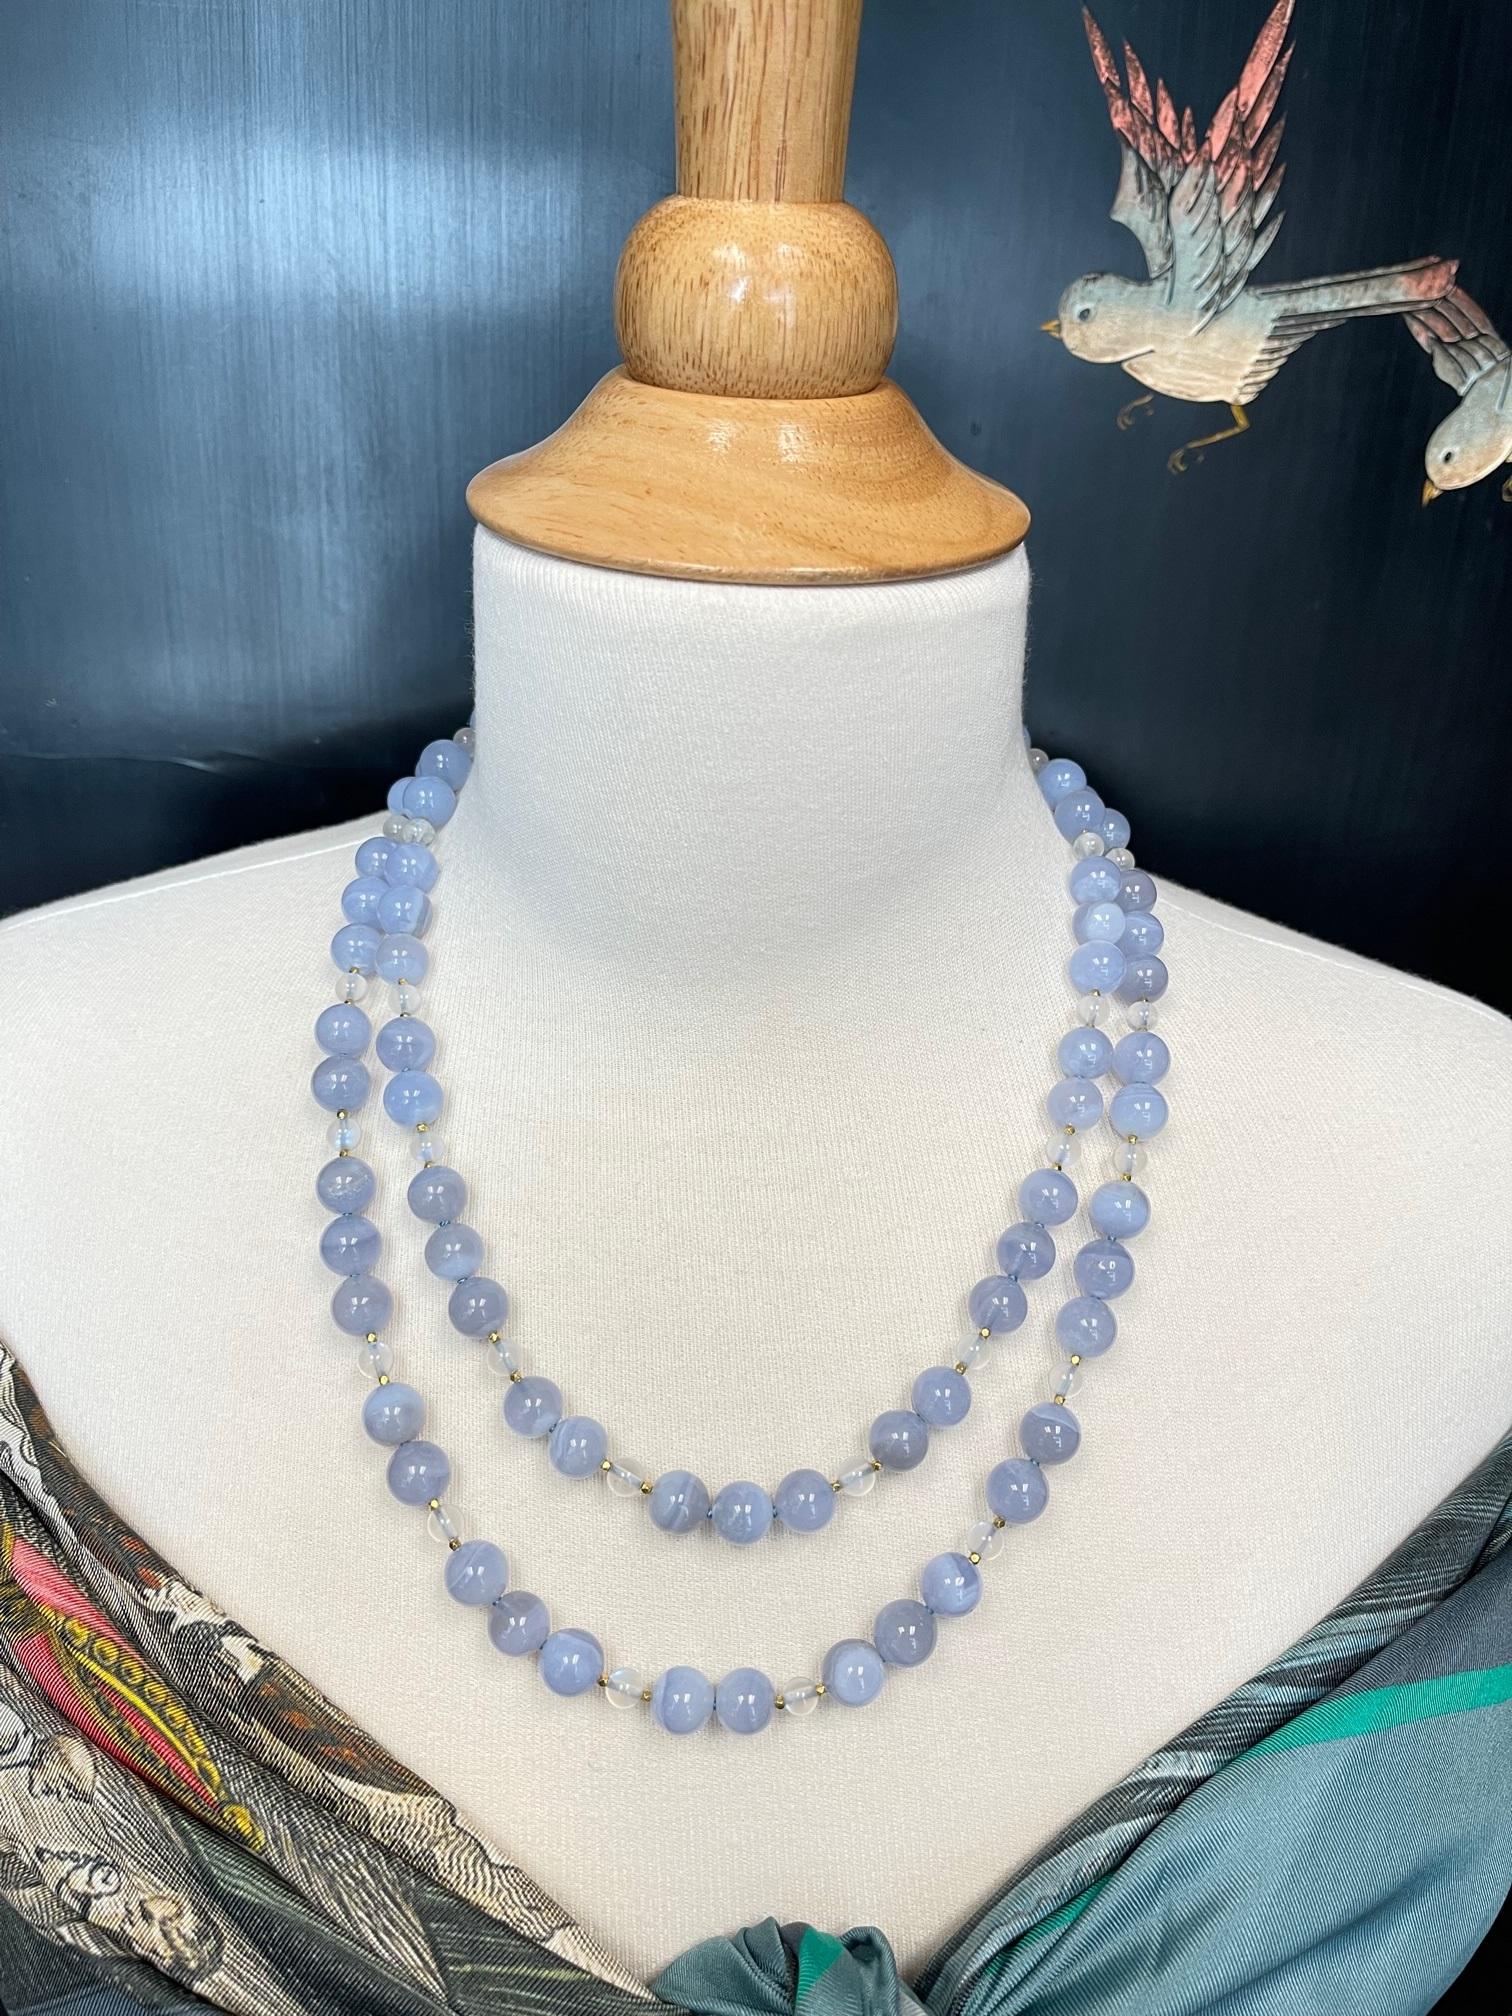 10mm Chalcedony and Moonstone Bead Necklace with Yellow Gold Accents For Sale 5